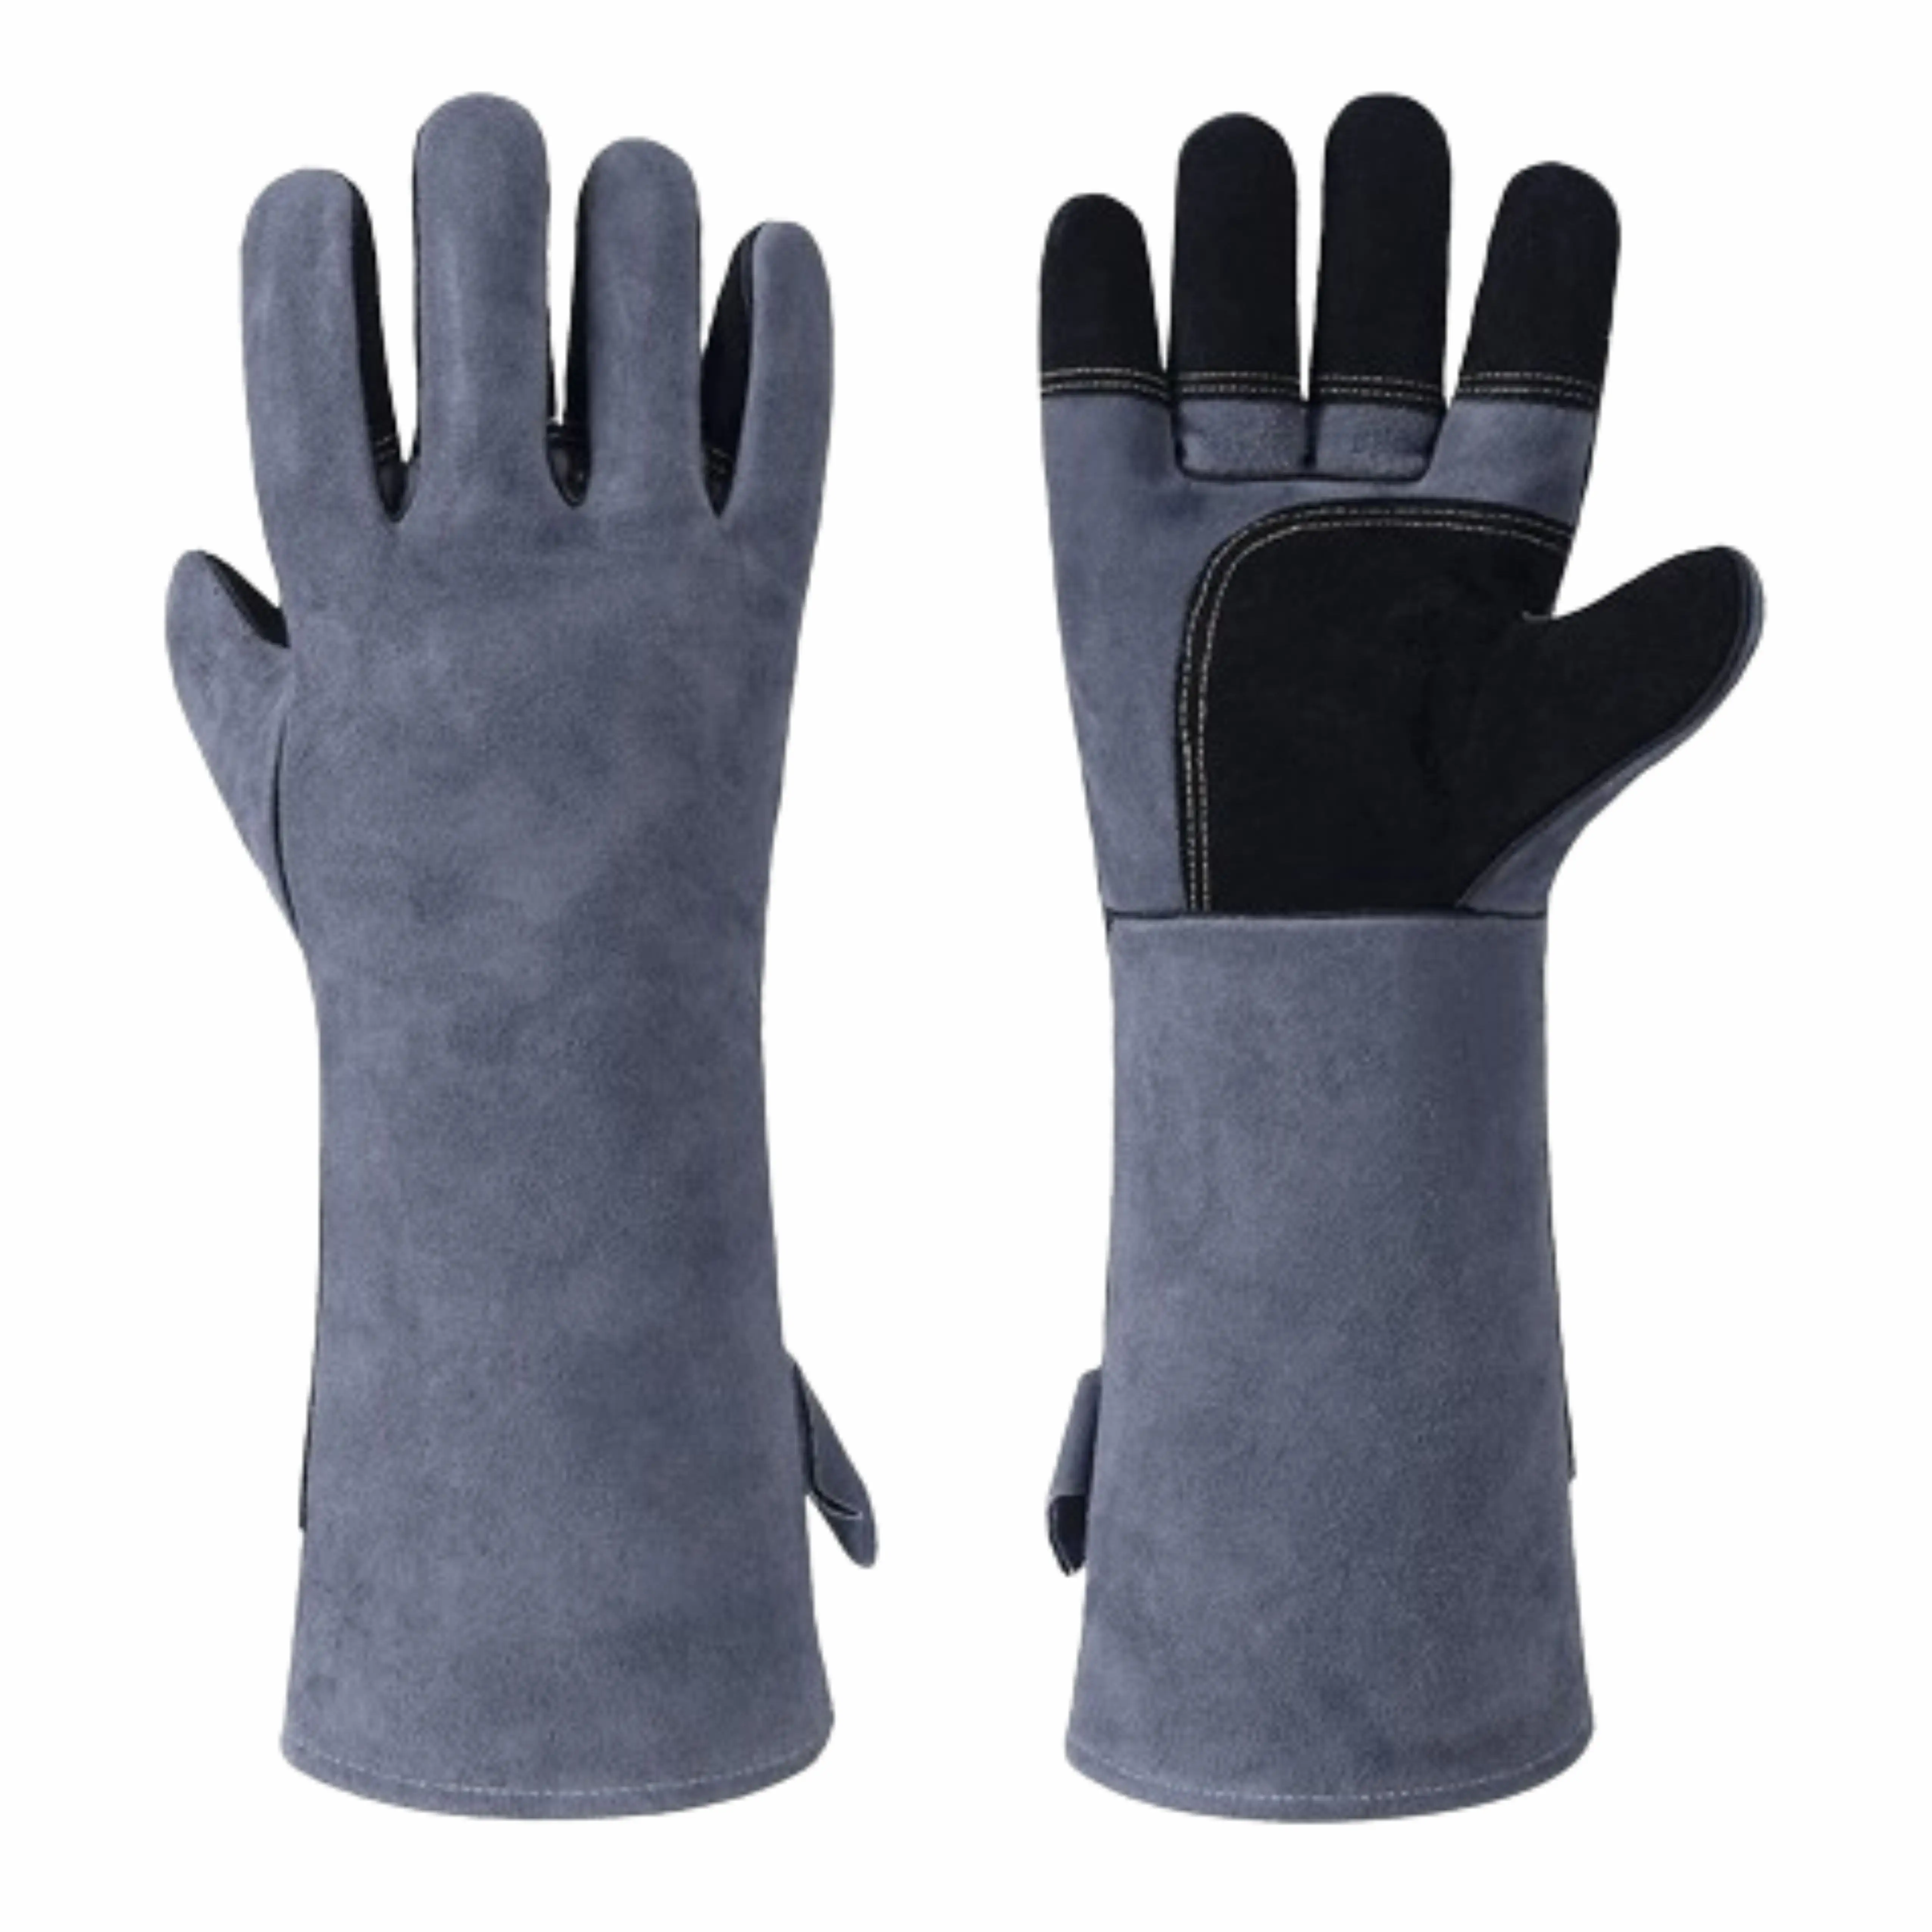 Reinforced cowhide split leather heavy duty welding gloves industrial safety hand protection construction flame retardant gloves